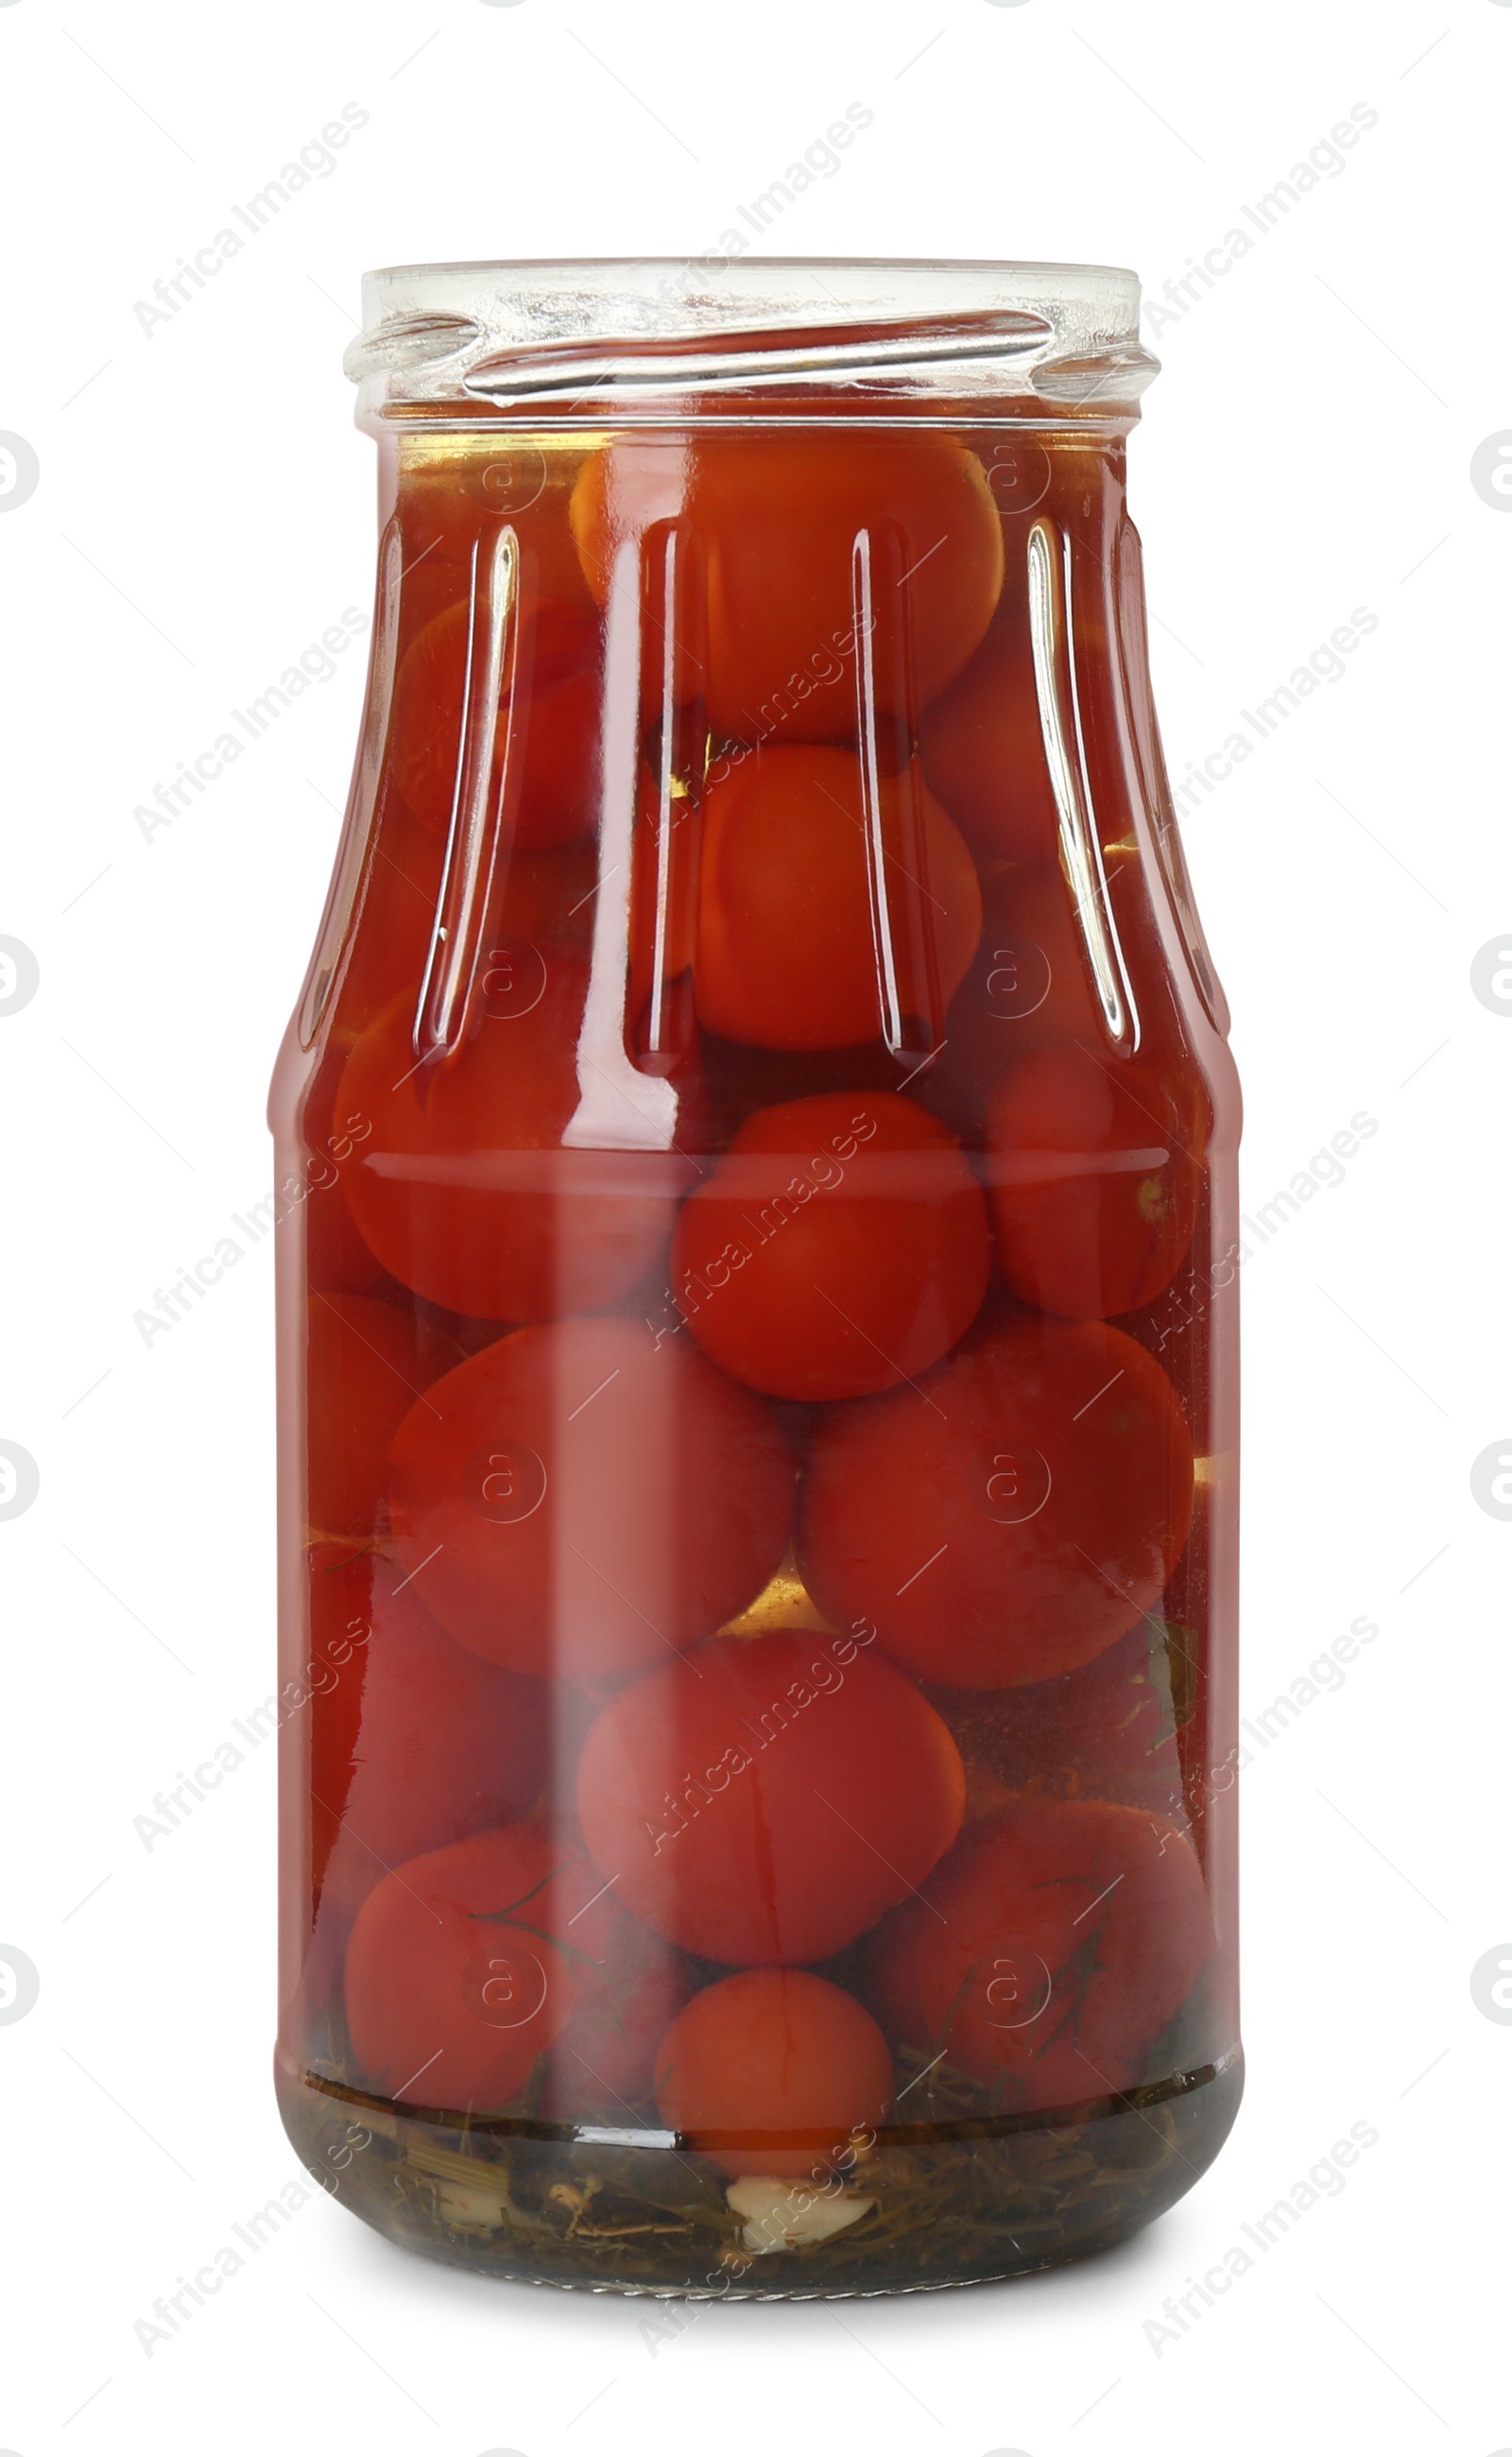 Photo of Jar of pickled tomatoes isolated on white